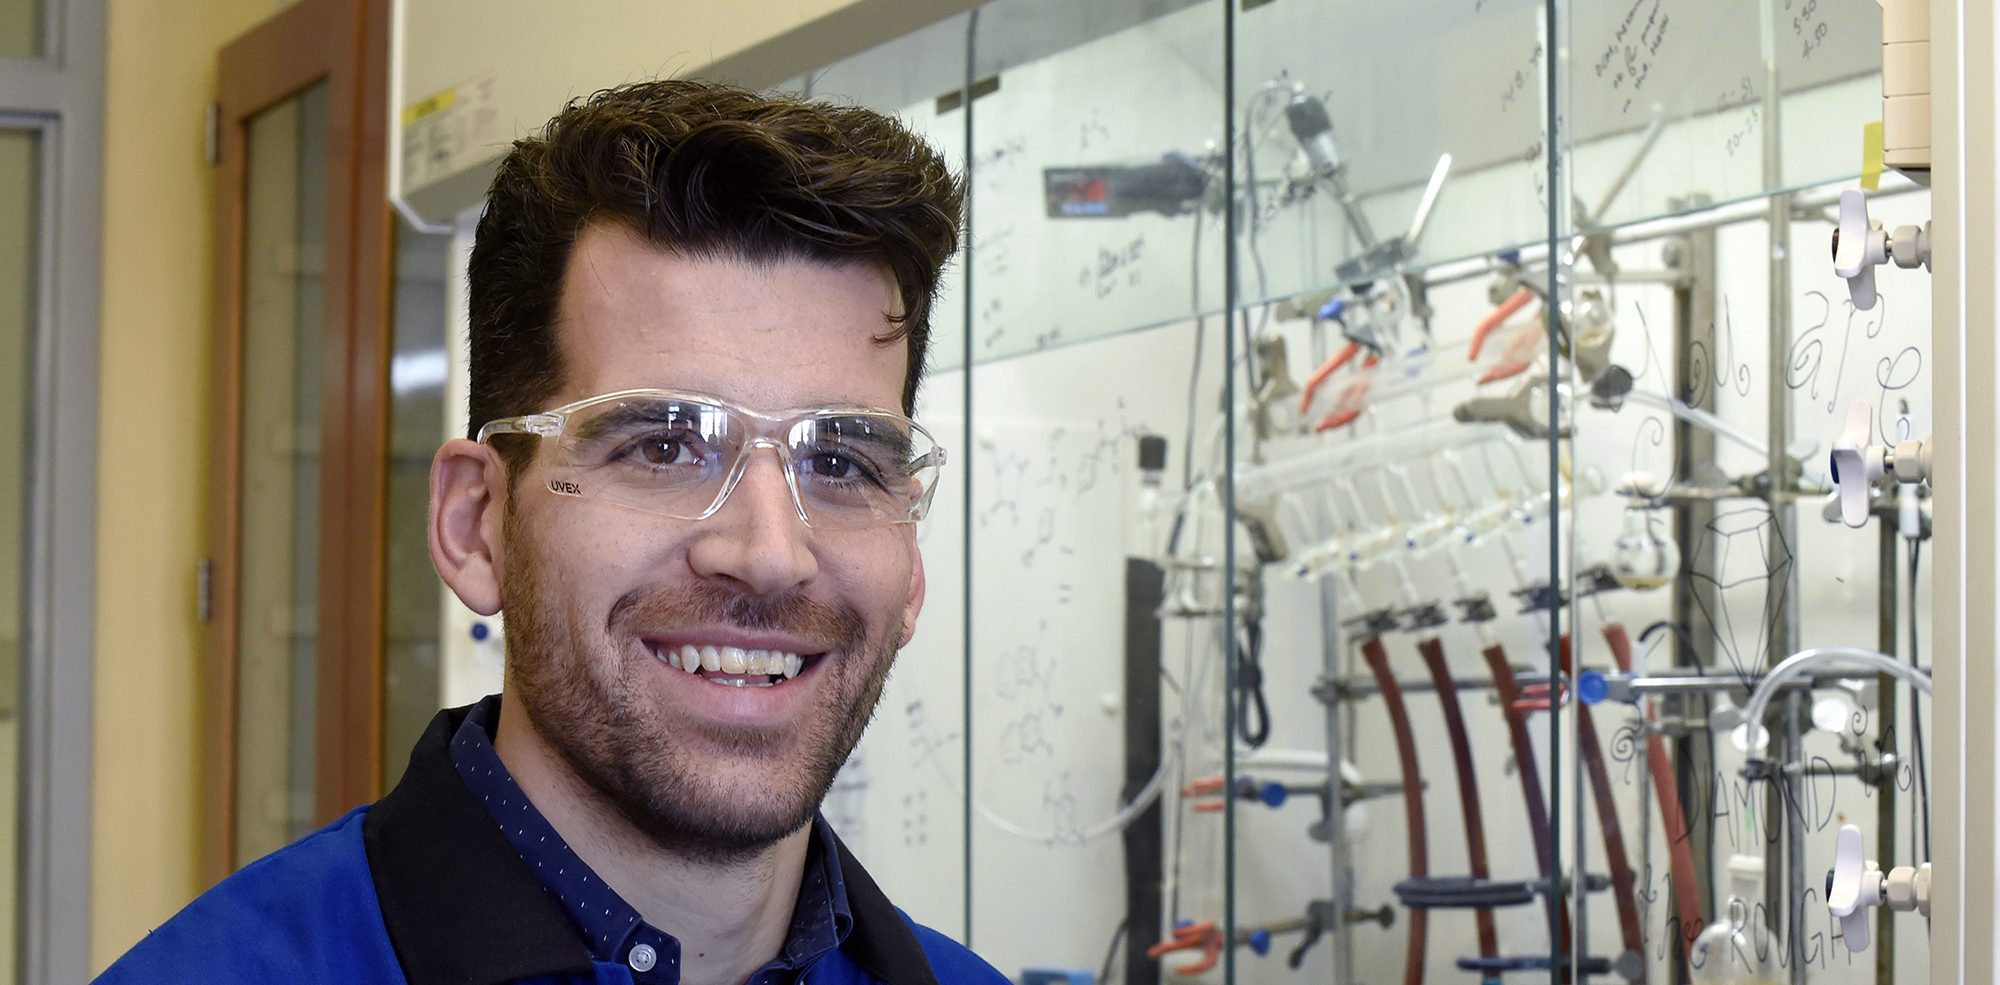 Frank Leibfarth won both an Alfred P. Sloan Research Fellowship and a Cottrell Scholar Award, two top honors given to early-career scientists. (photo by Donn Young) He is pictured here in his lab.